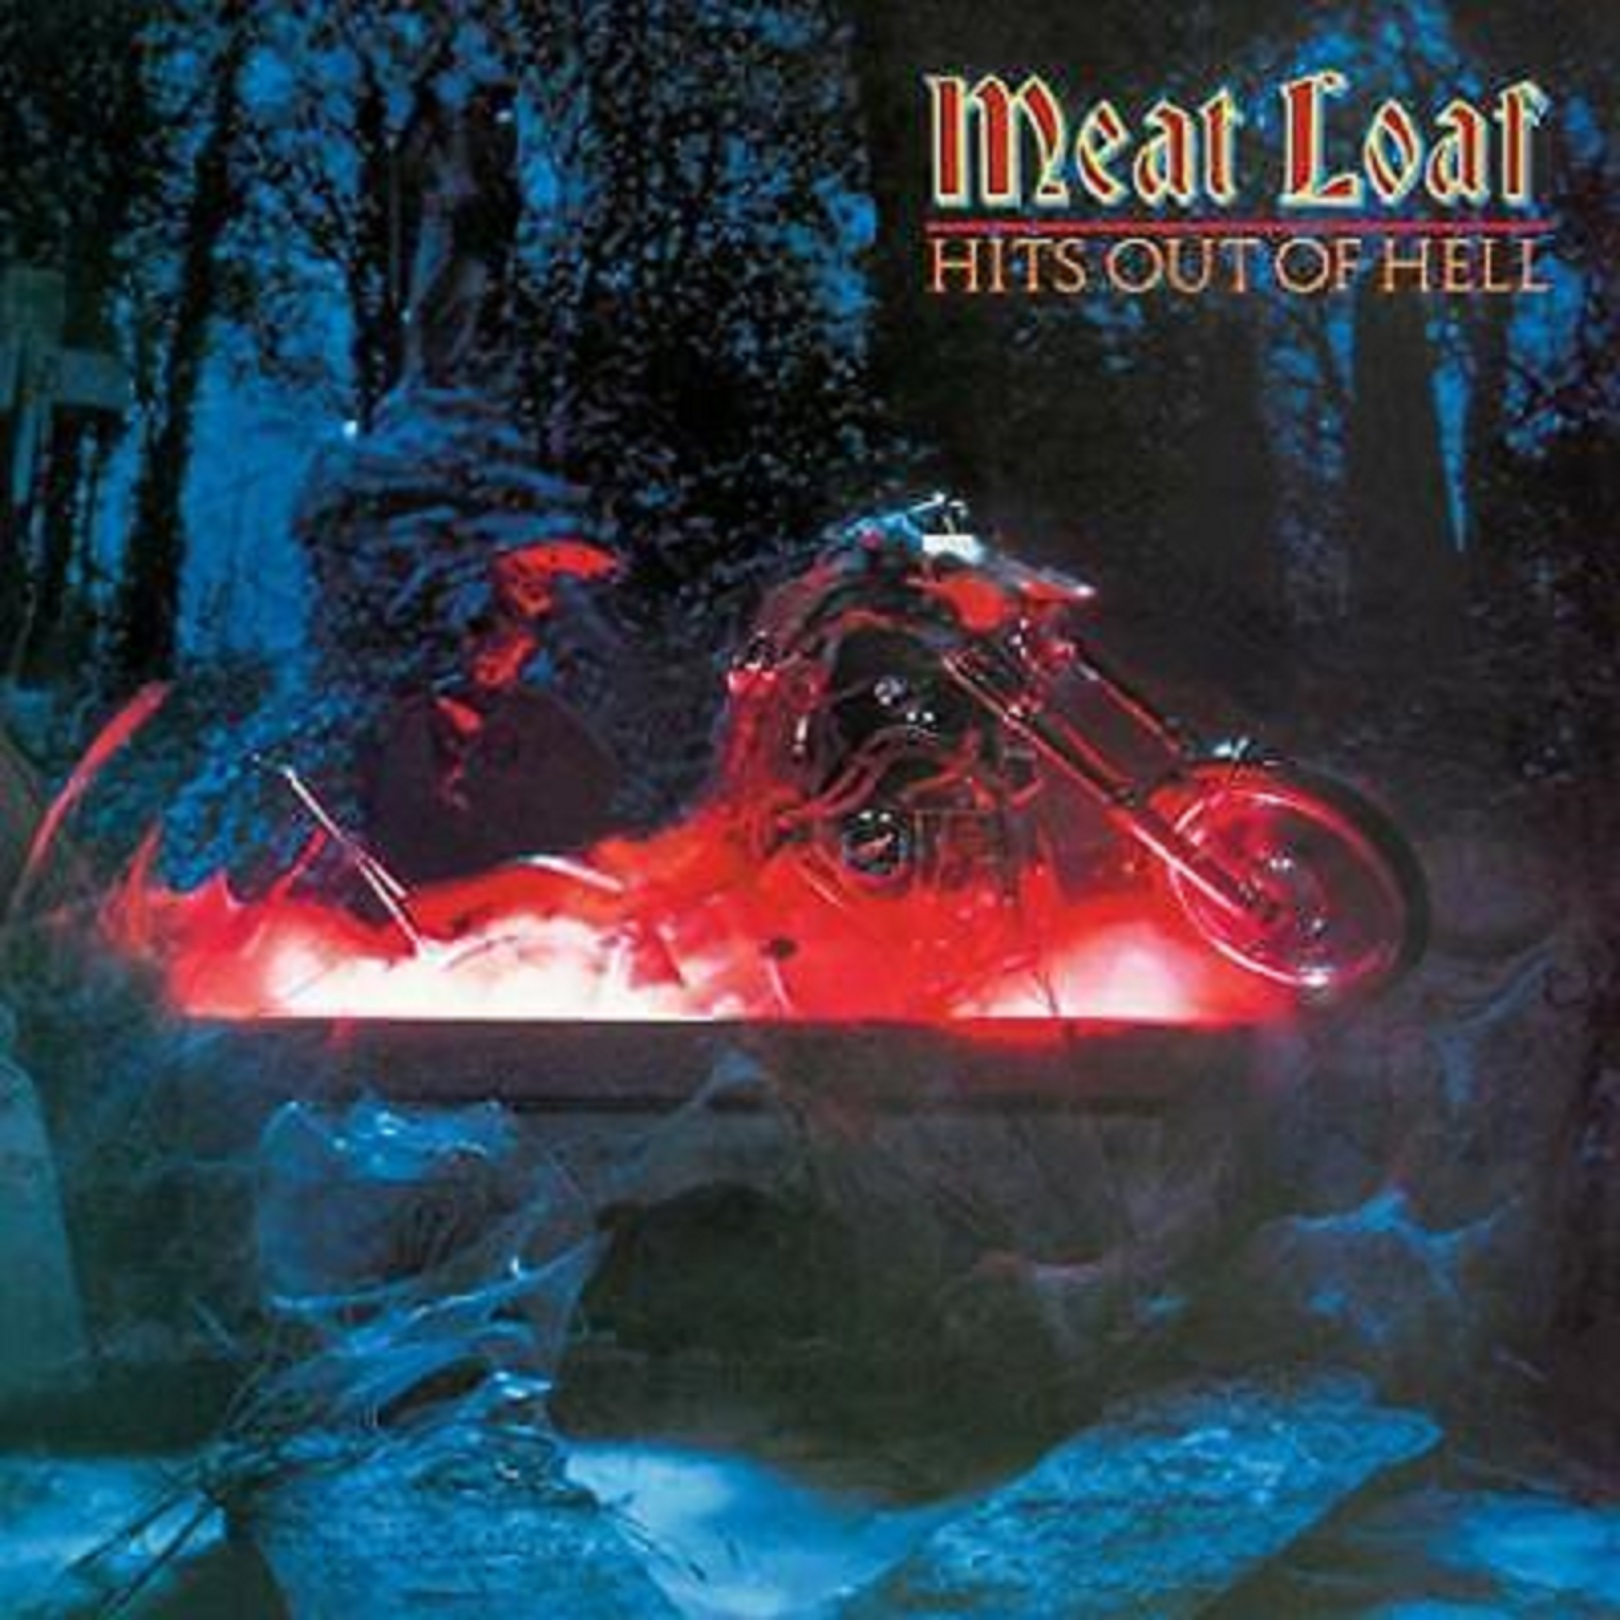 Hits Out of Hell | Meat Loaf